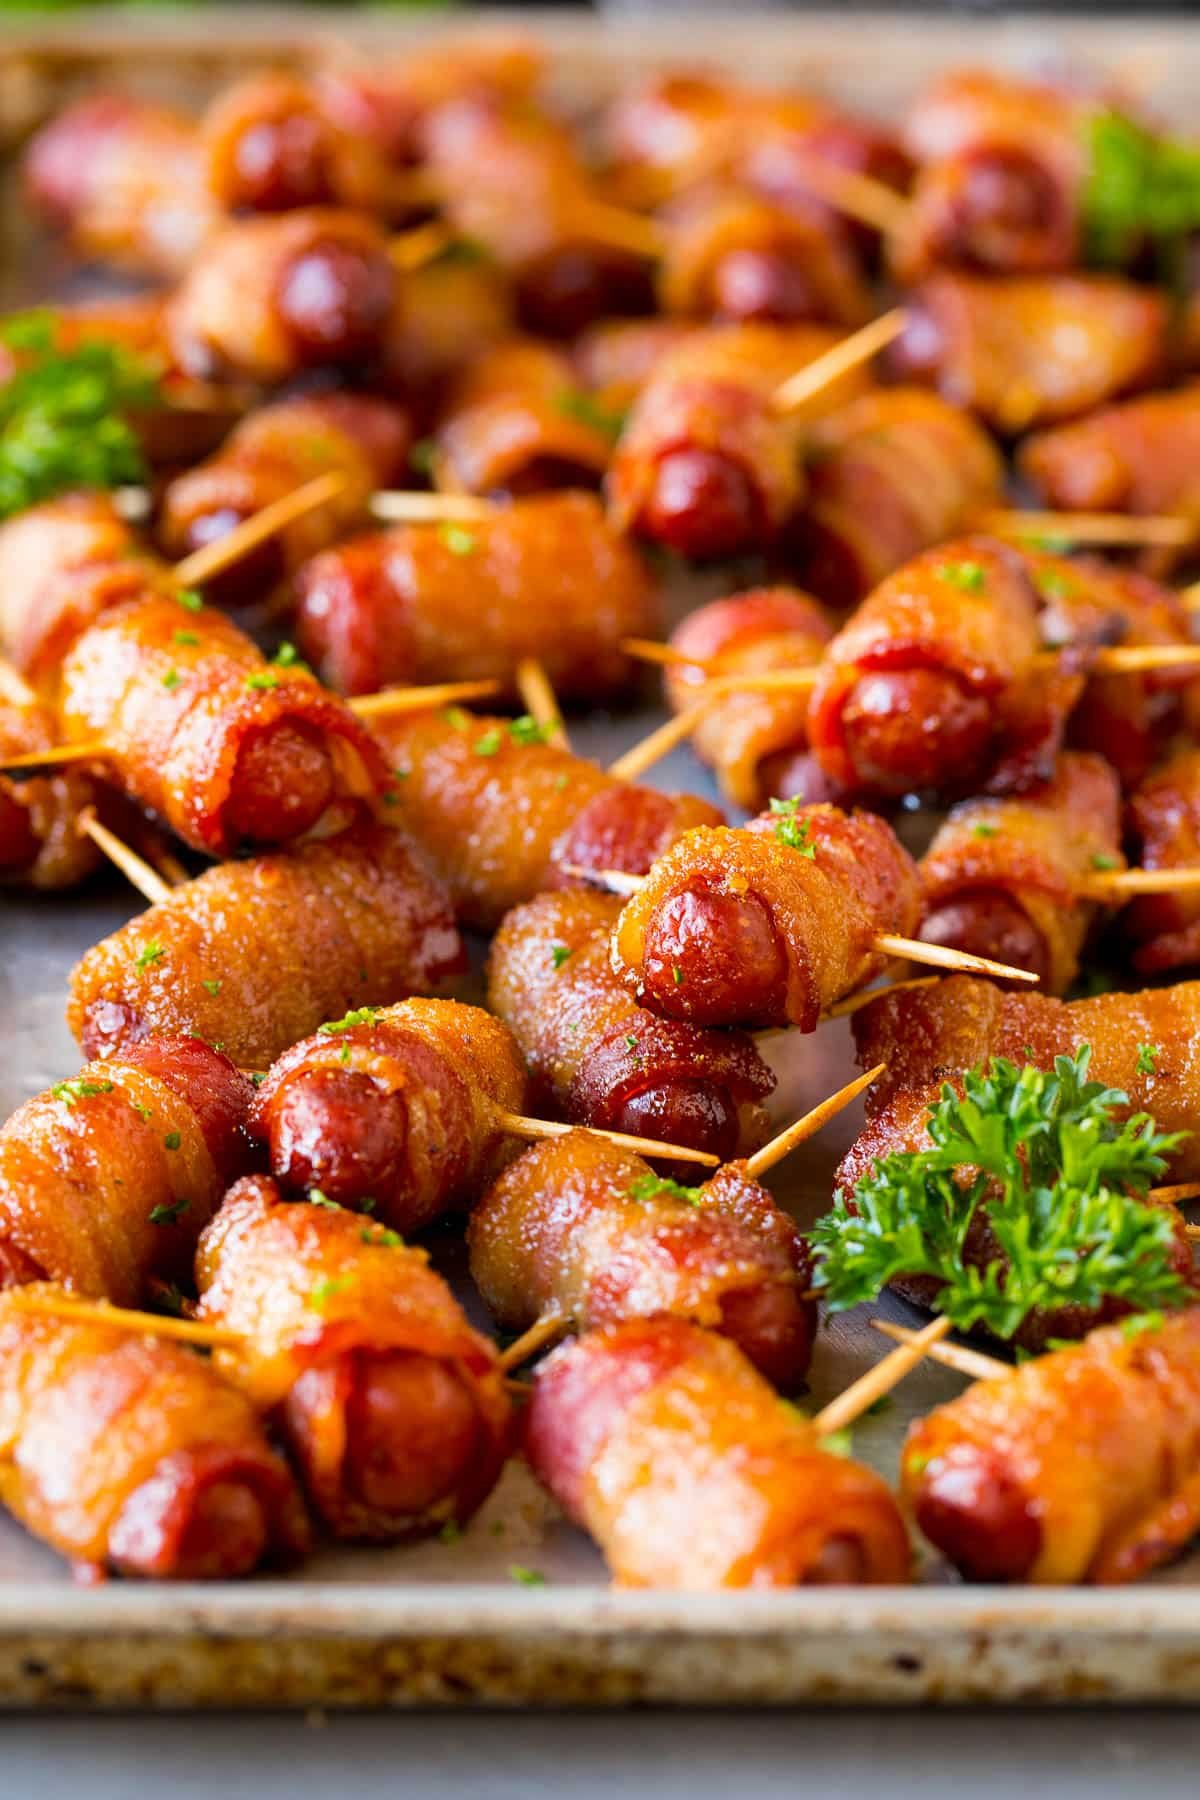 A sheet pan full of bacon wrapped smokies, garnished with parsley.